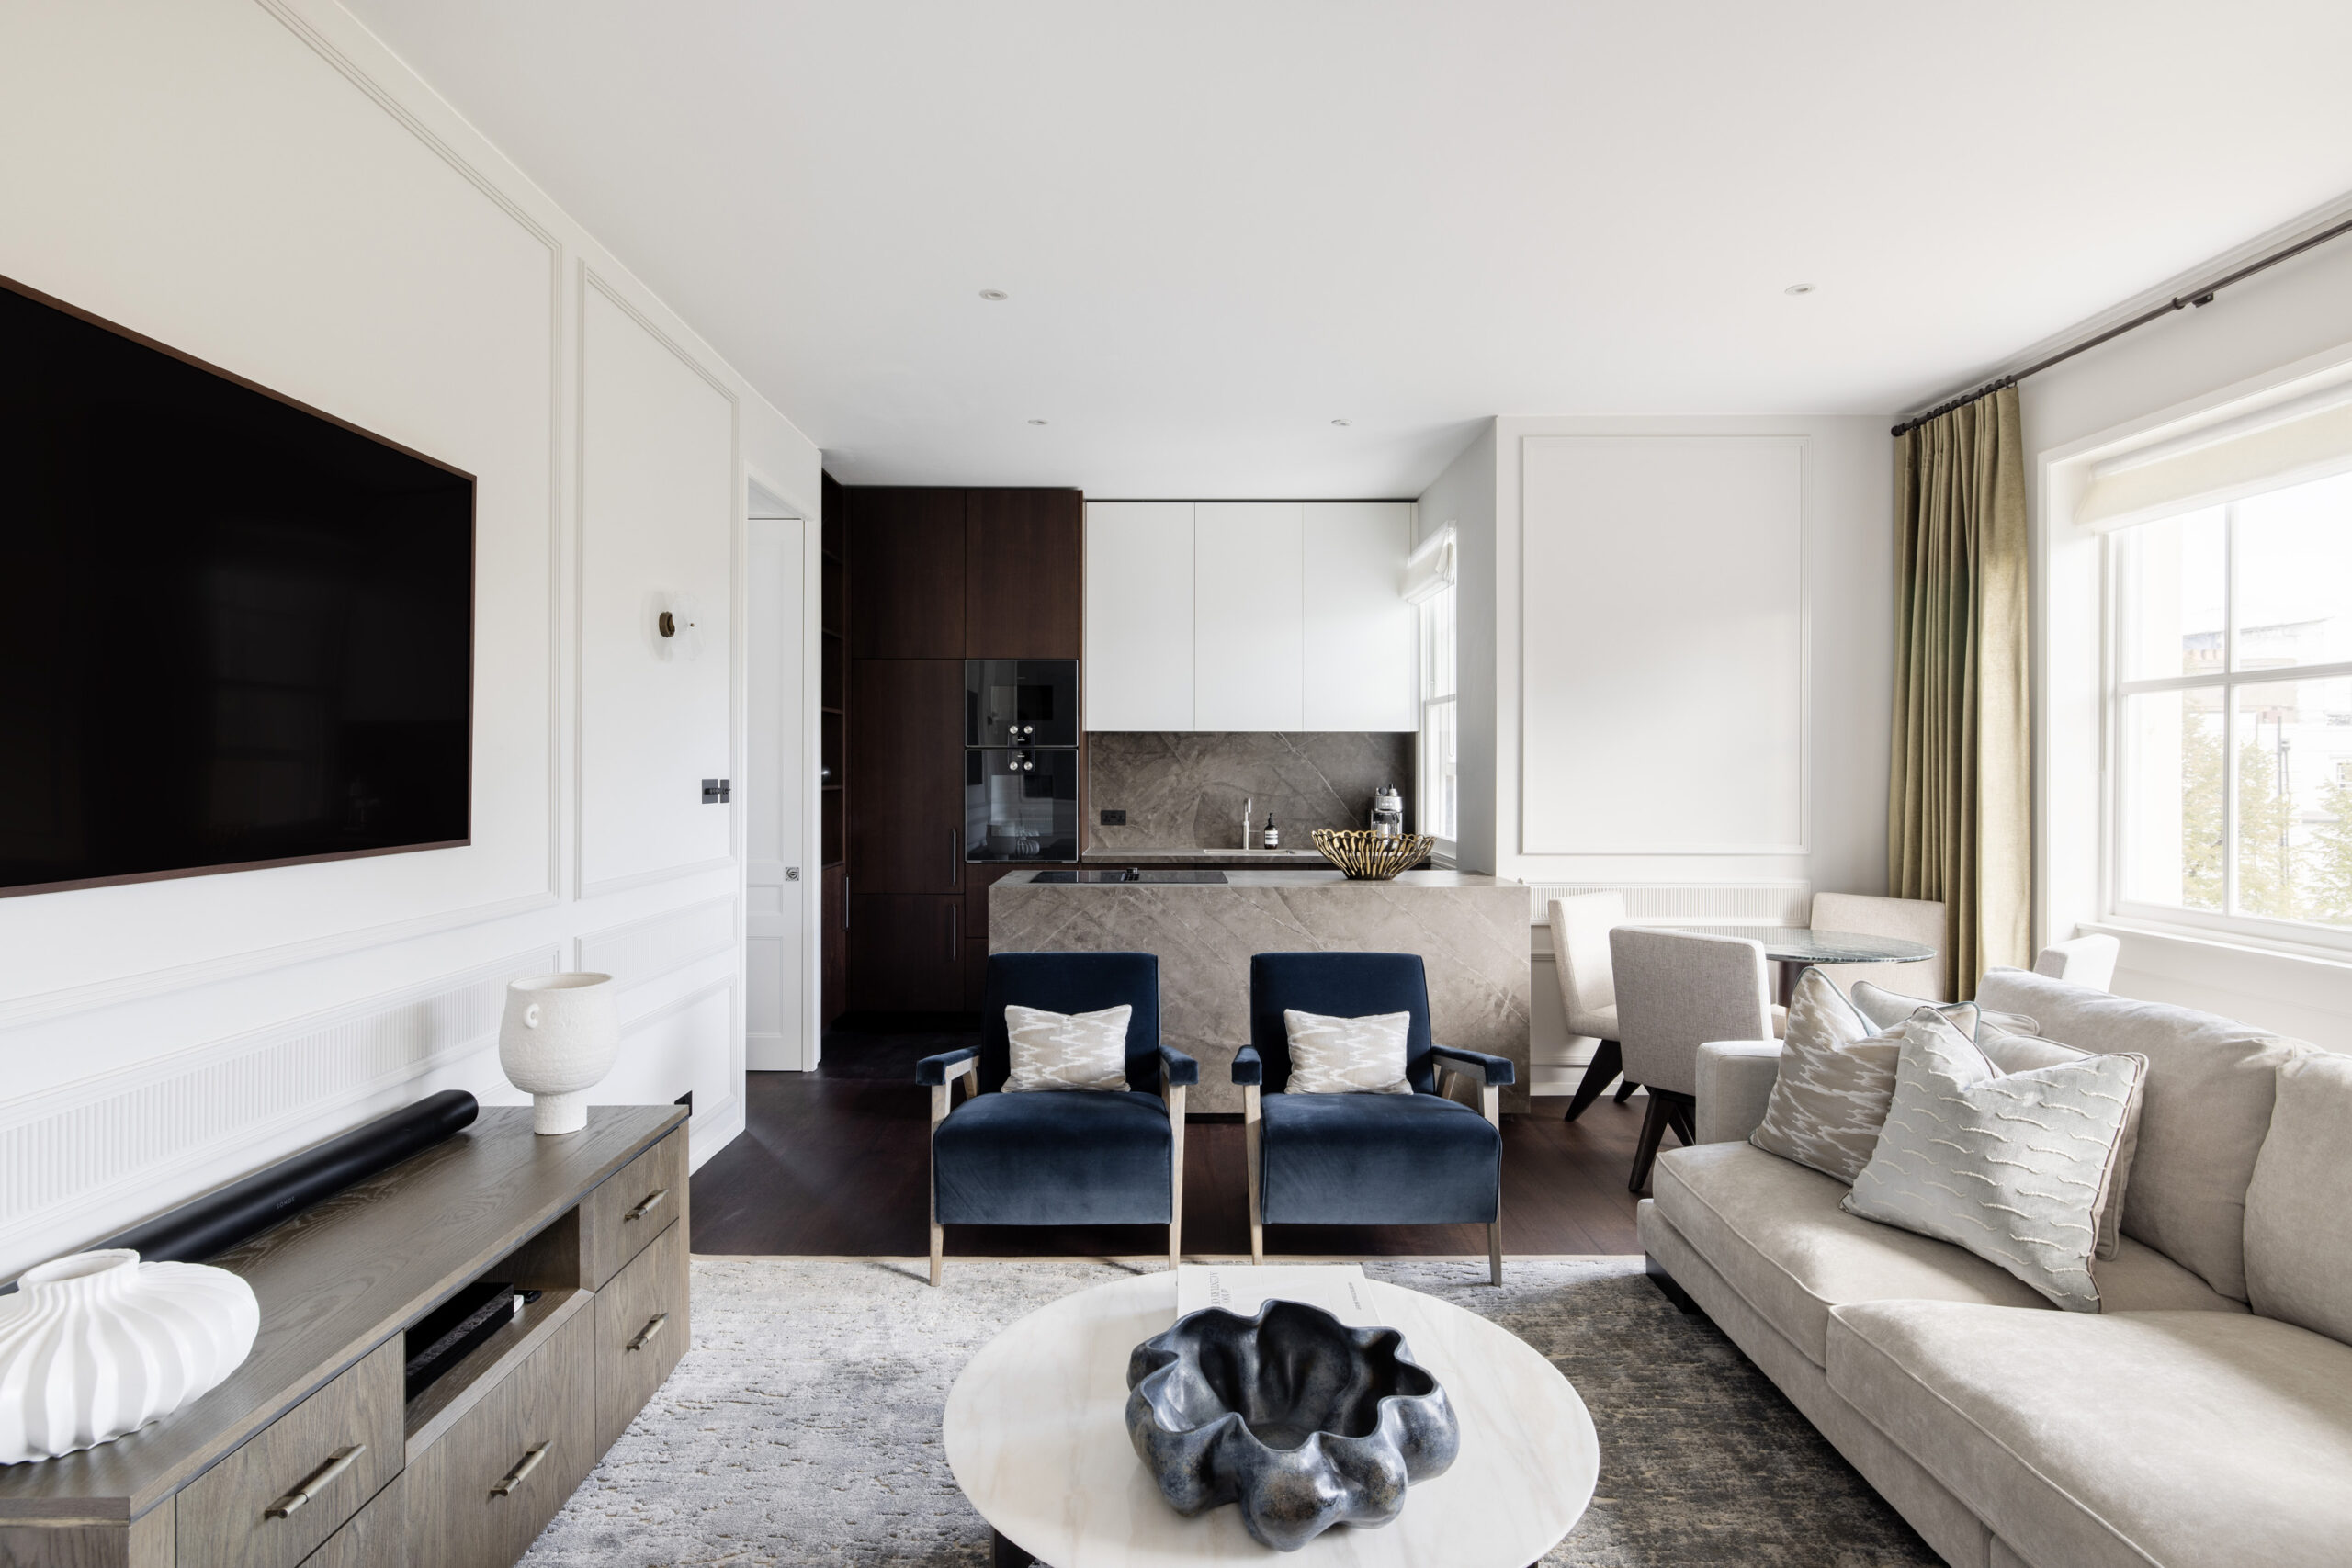 Luxury open-plan kitchen and living room of a two-bedroom apartment for sale in Notting Hill